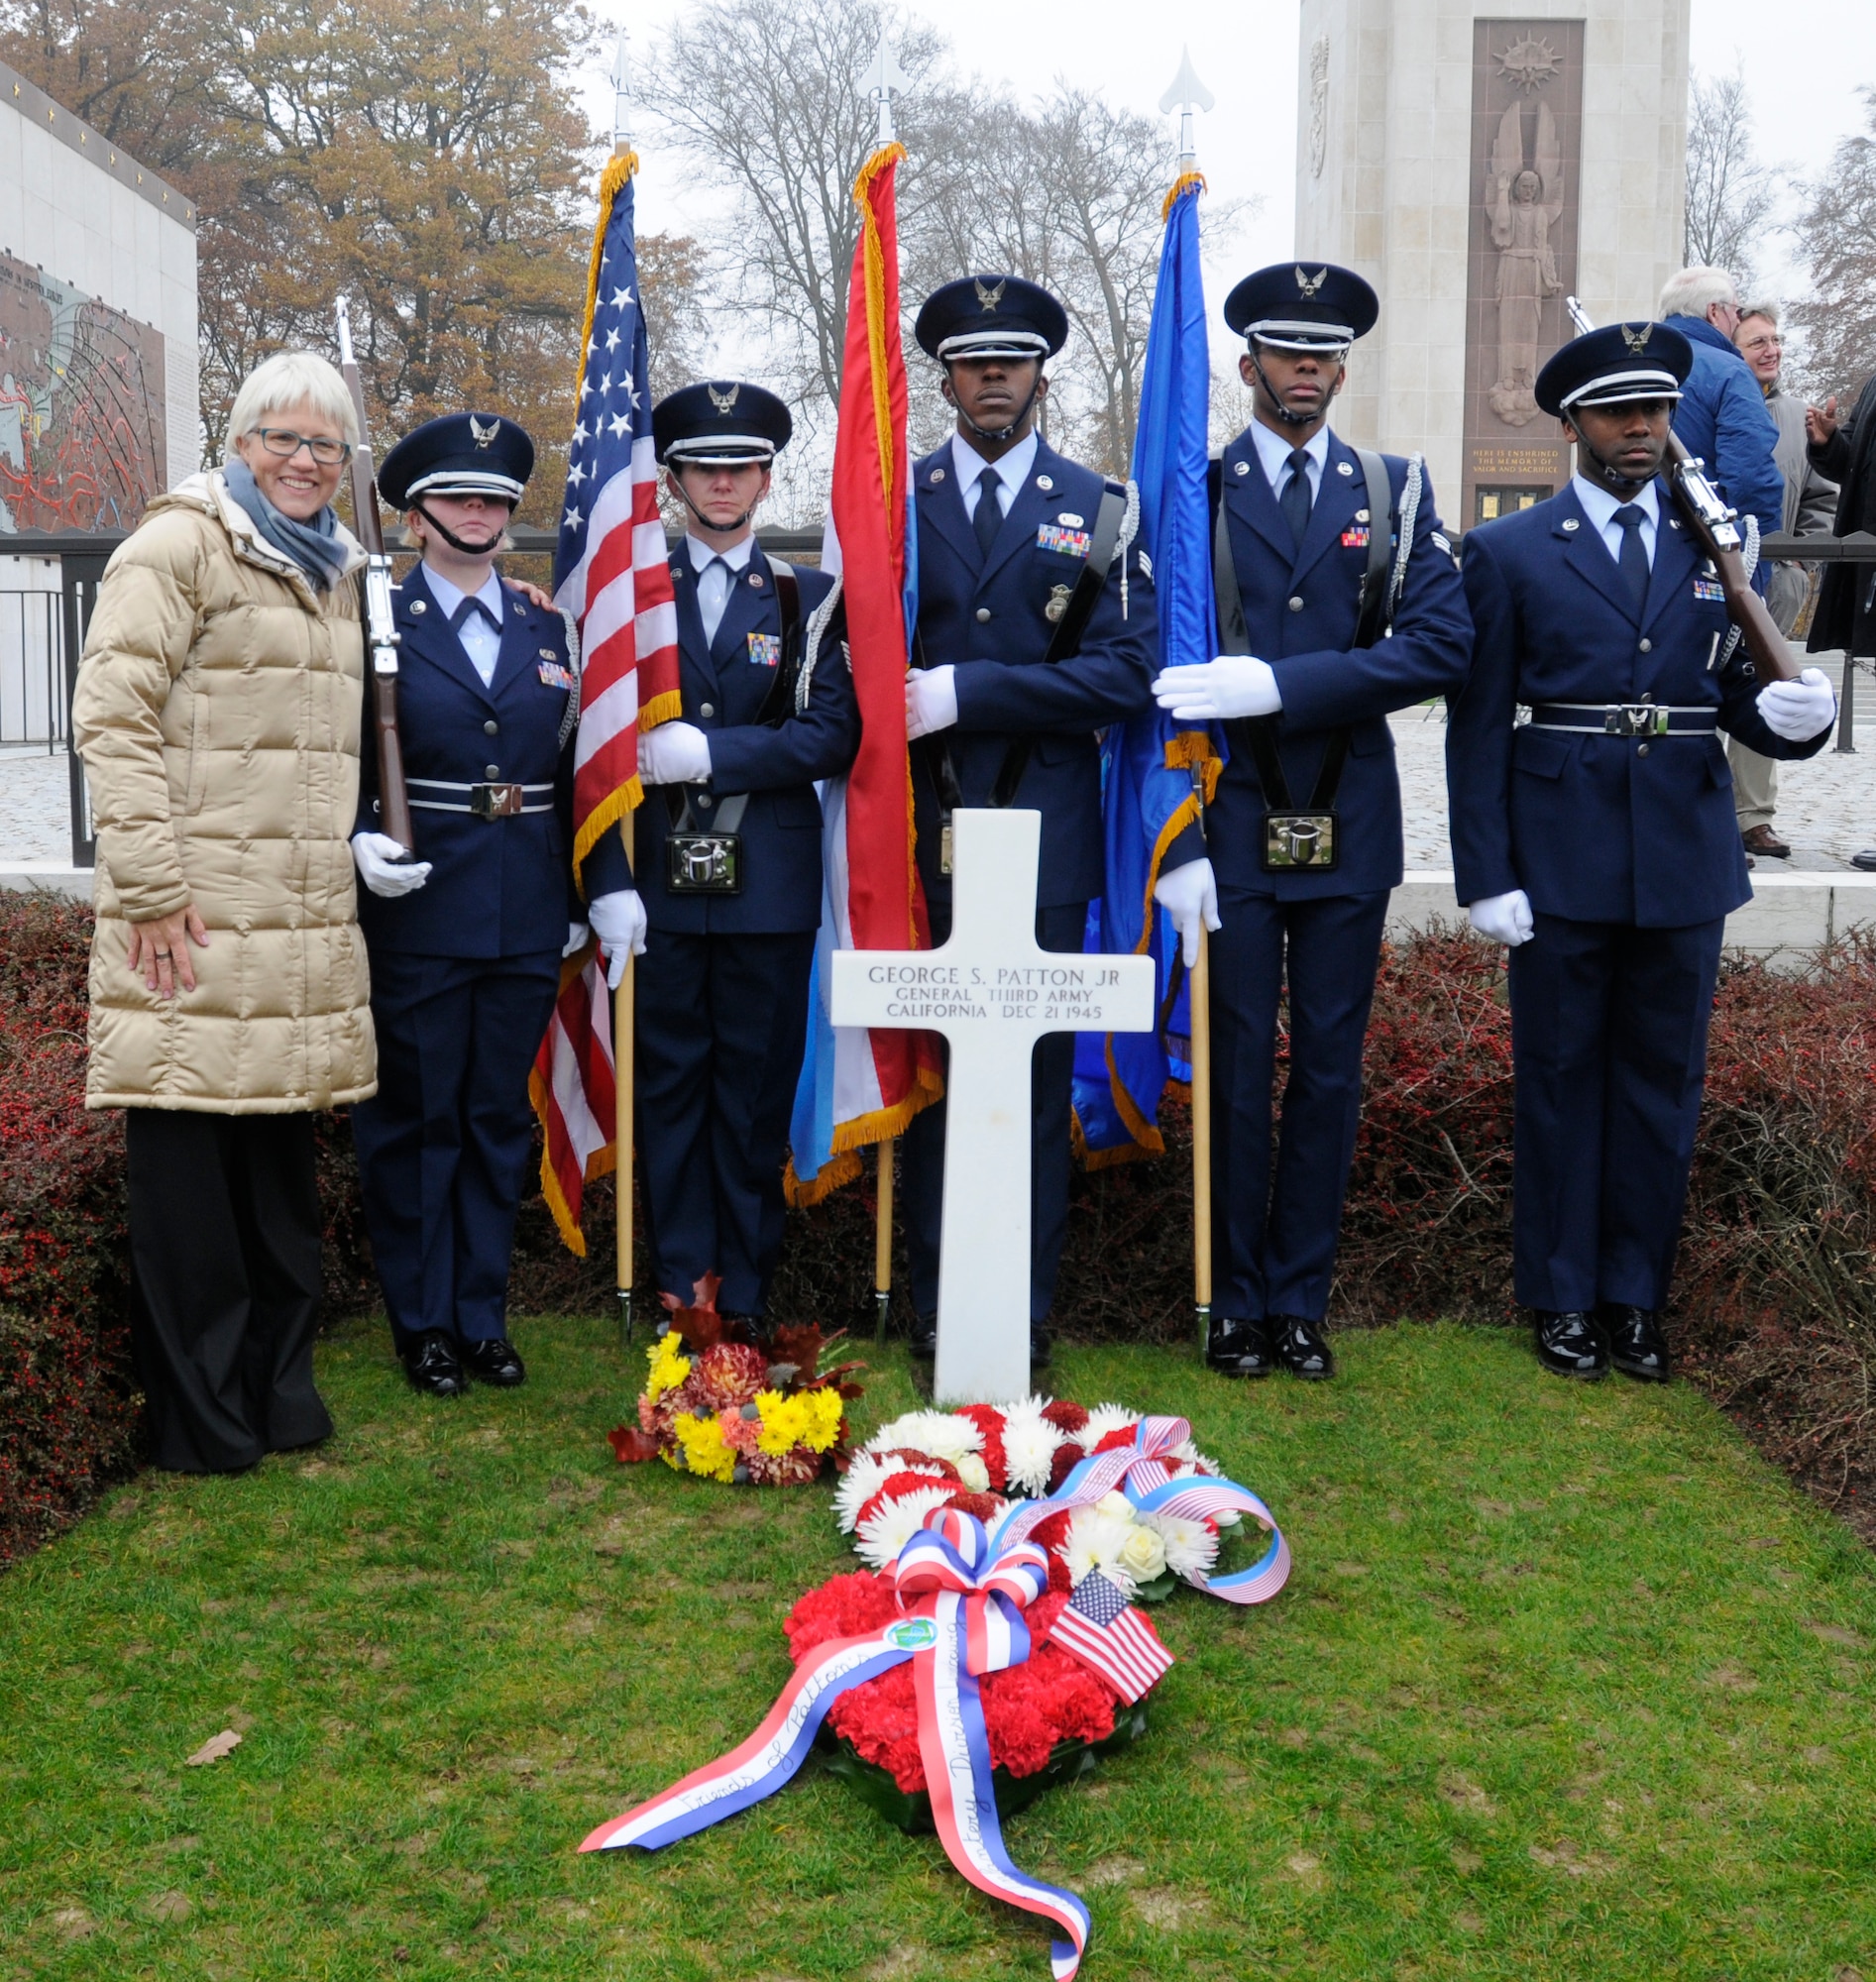 SPANGDAHLEM AIR BASE, Germany -- The 702nd Munitions Support Squadron Color Guard from Buechel Air Base, Germany, stands at attention in front of the grave of Gen. George S. Patton Jr., Third Army commander during World War II, with Helen Patton-Plusczyk, General Patton's granddaughter, during the annual Veterans Day ceremony at the Luxembourg American Cemetery and Memorial in Luxembourg City Nov. 11. The 50.5 acre cemetery, which is one of 14 American cemeteries established overseas after World War II, contains the remains of more than 5,000 American servicemembers who died during World War II. (U.S. Air Force photo/Maj. Jillian Torango)